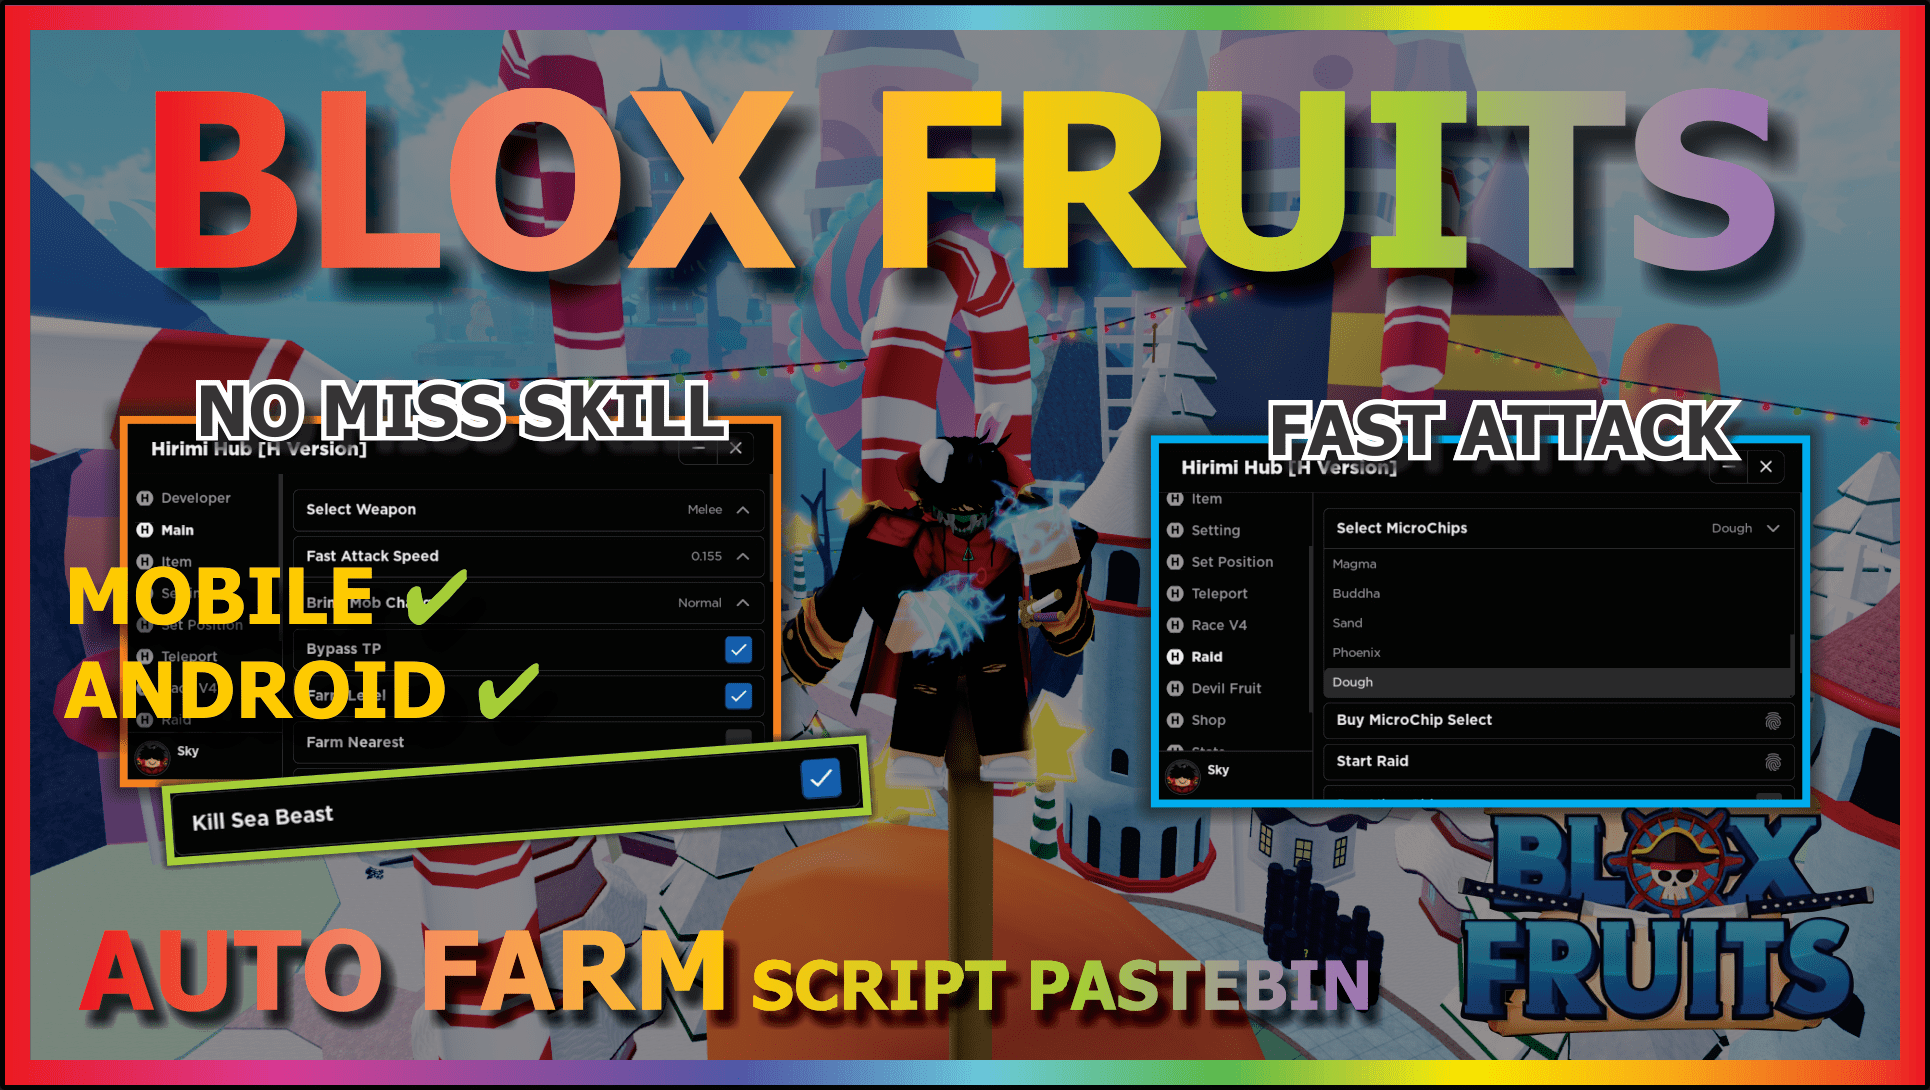 You are currently viewing BLOX FRUITS (HIRIMI H)